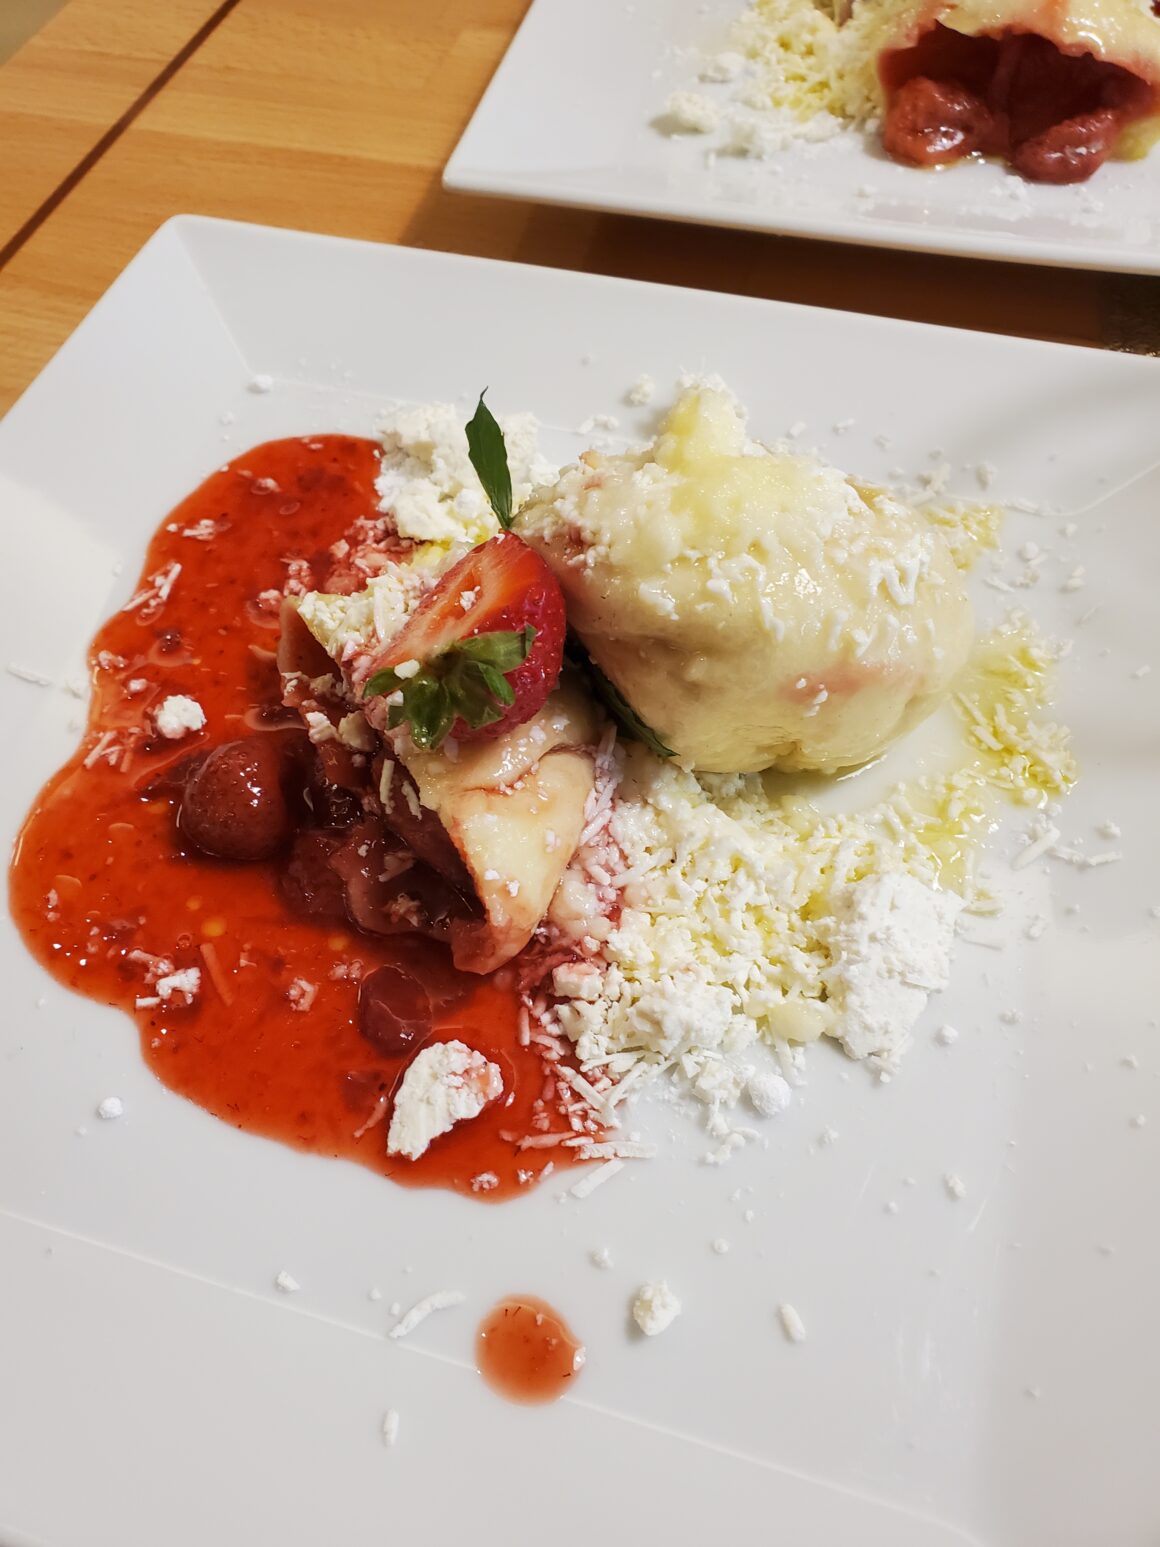 Dumplings stuffed with fruit are covered in a strawberry sauce, farmers cheese and powder sugar